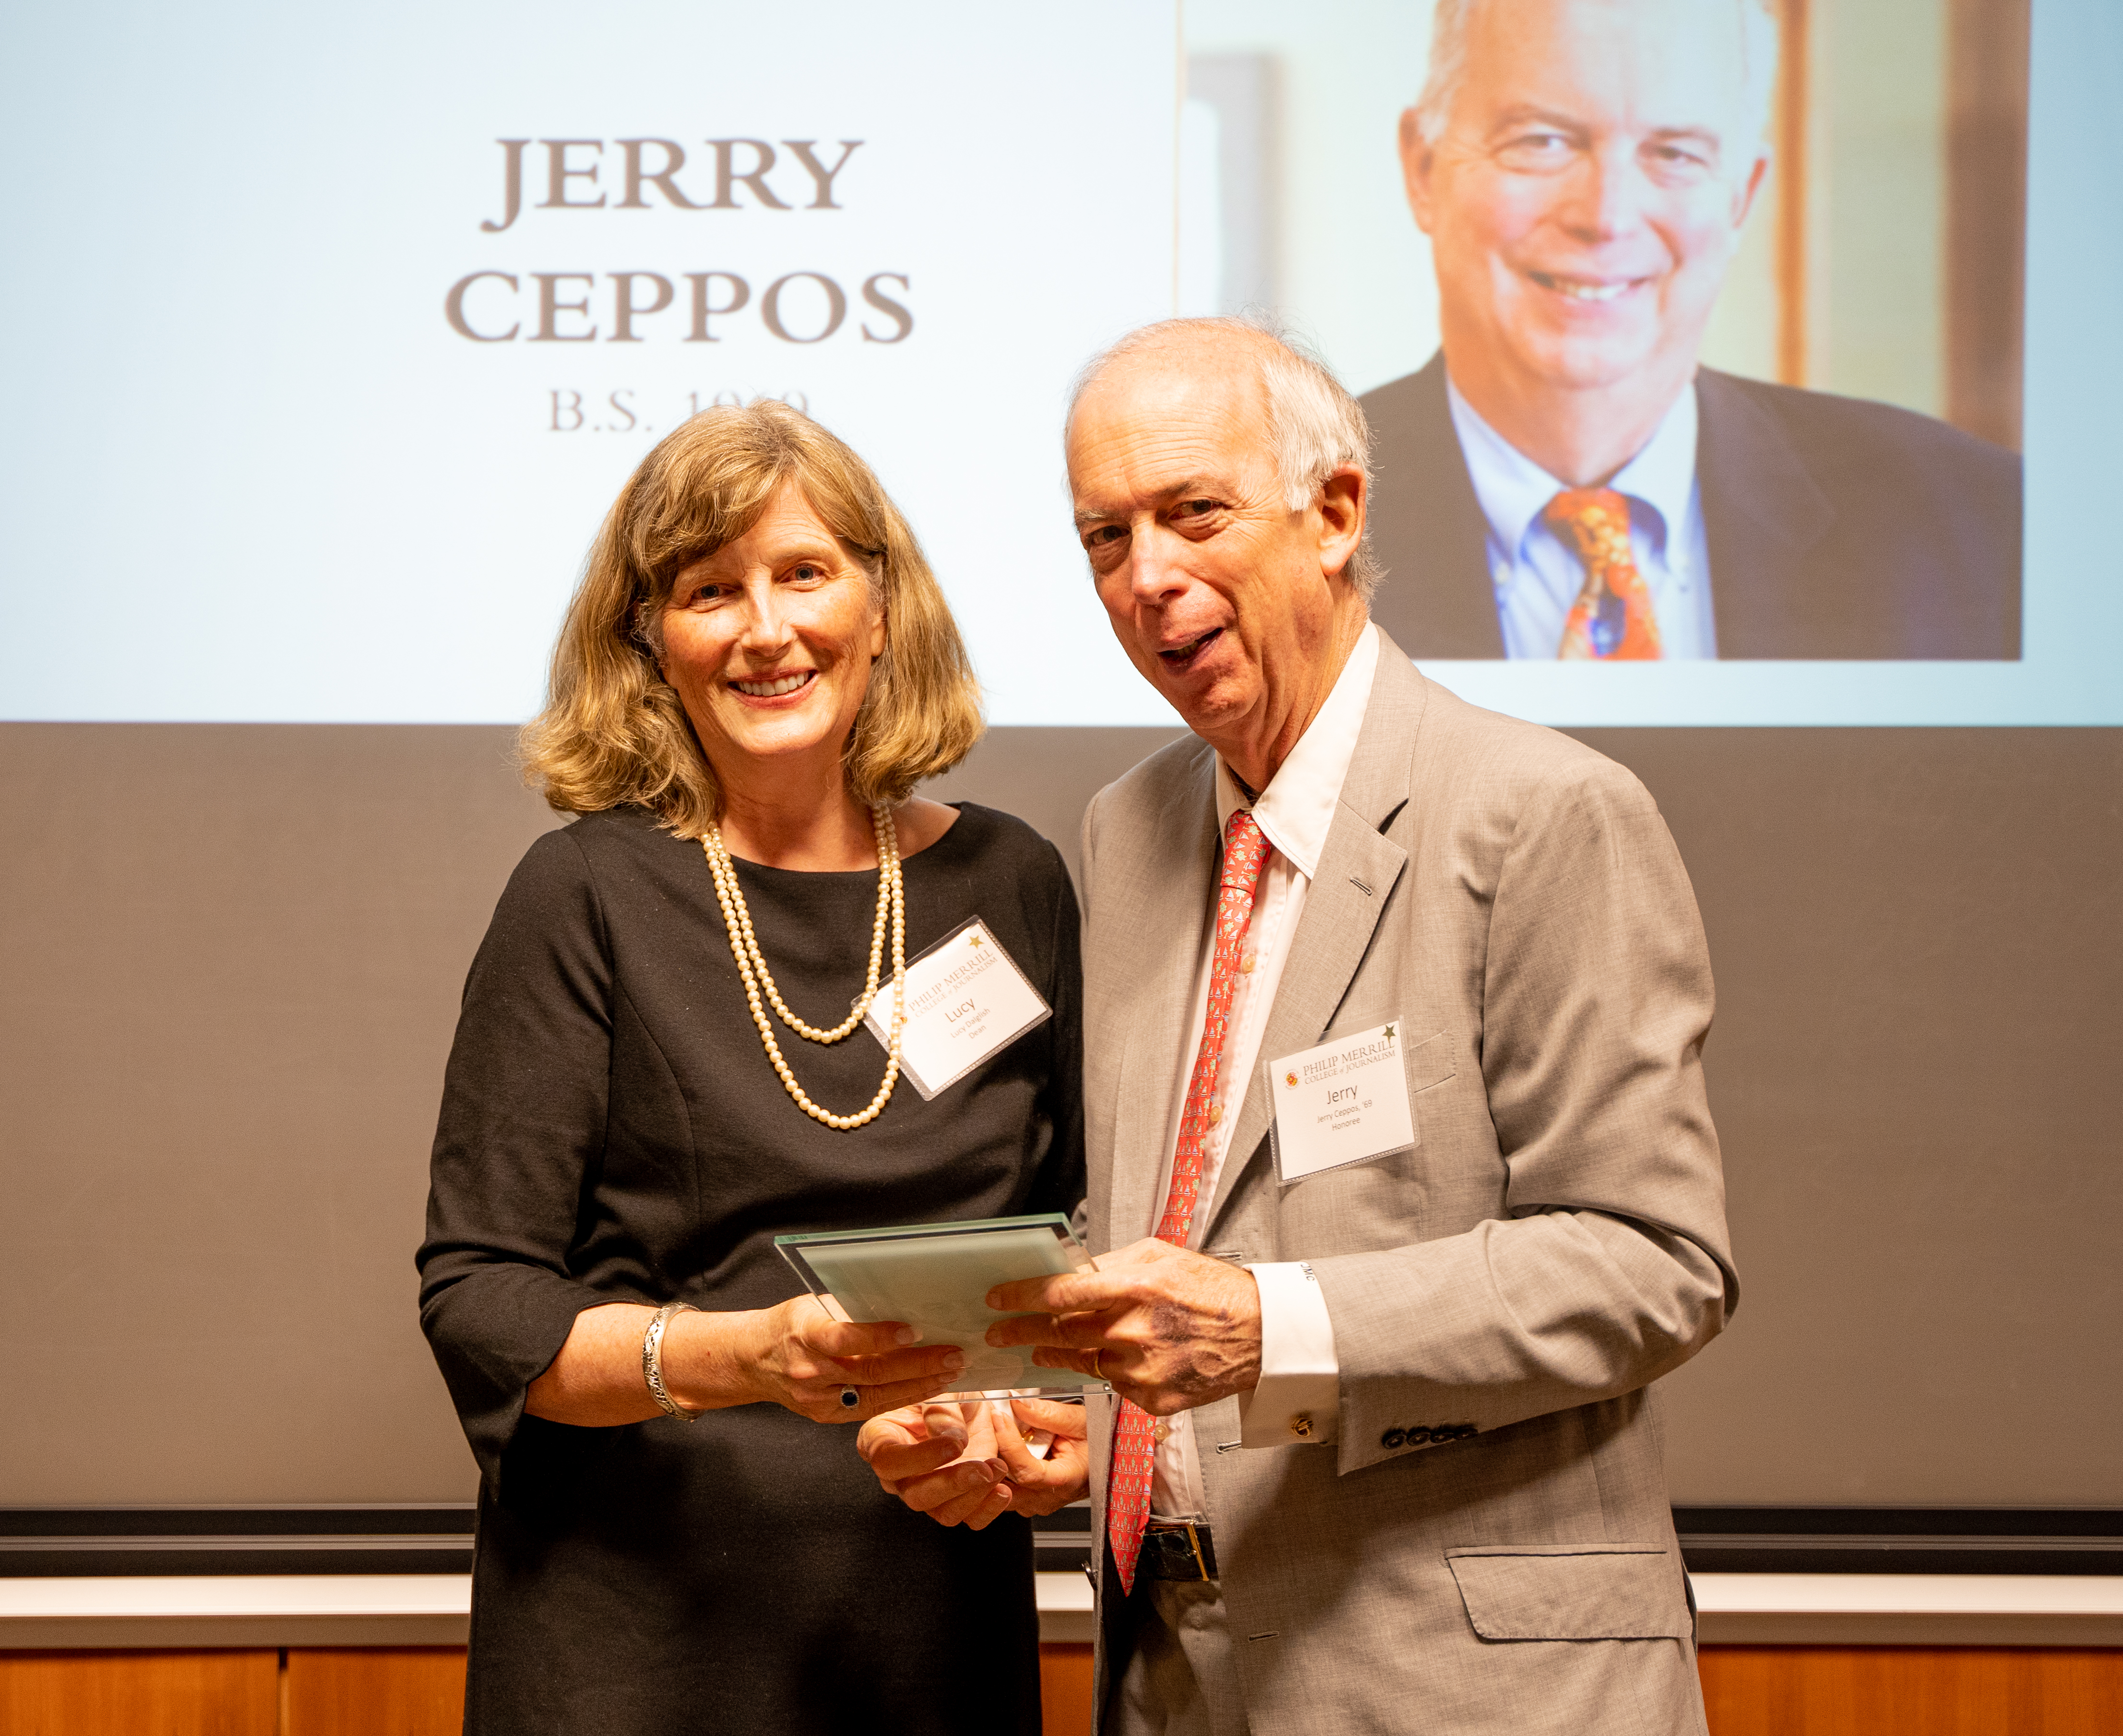 Jerry Ceppos and Lucy Dalglish